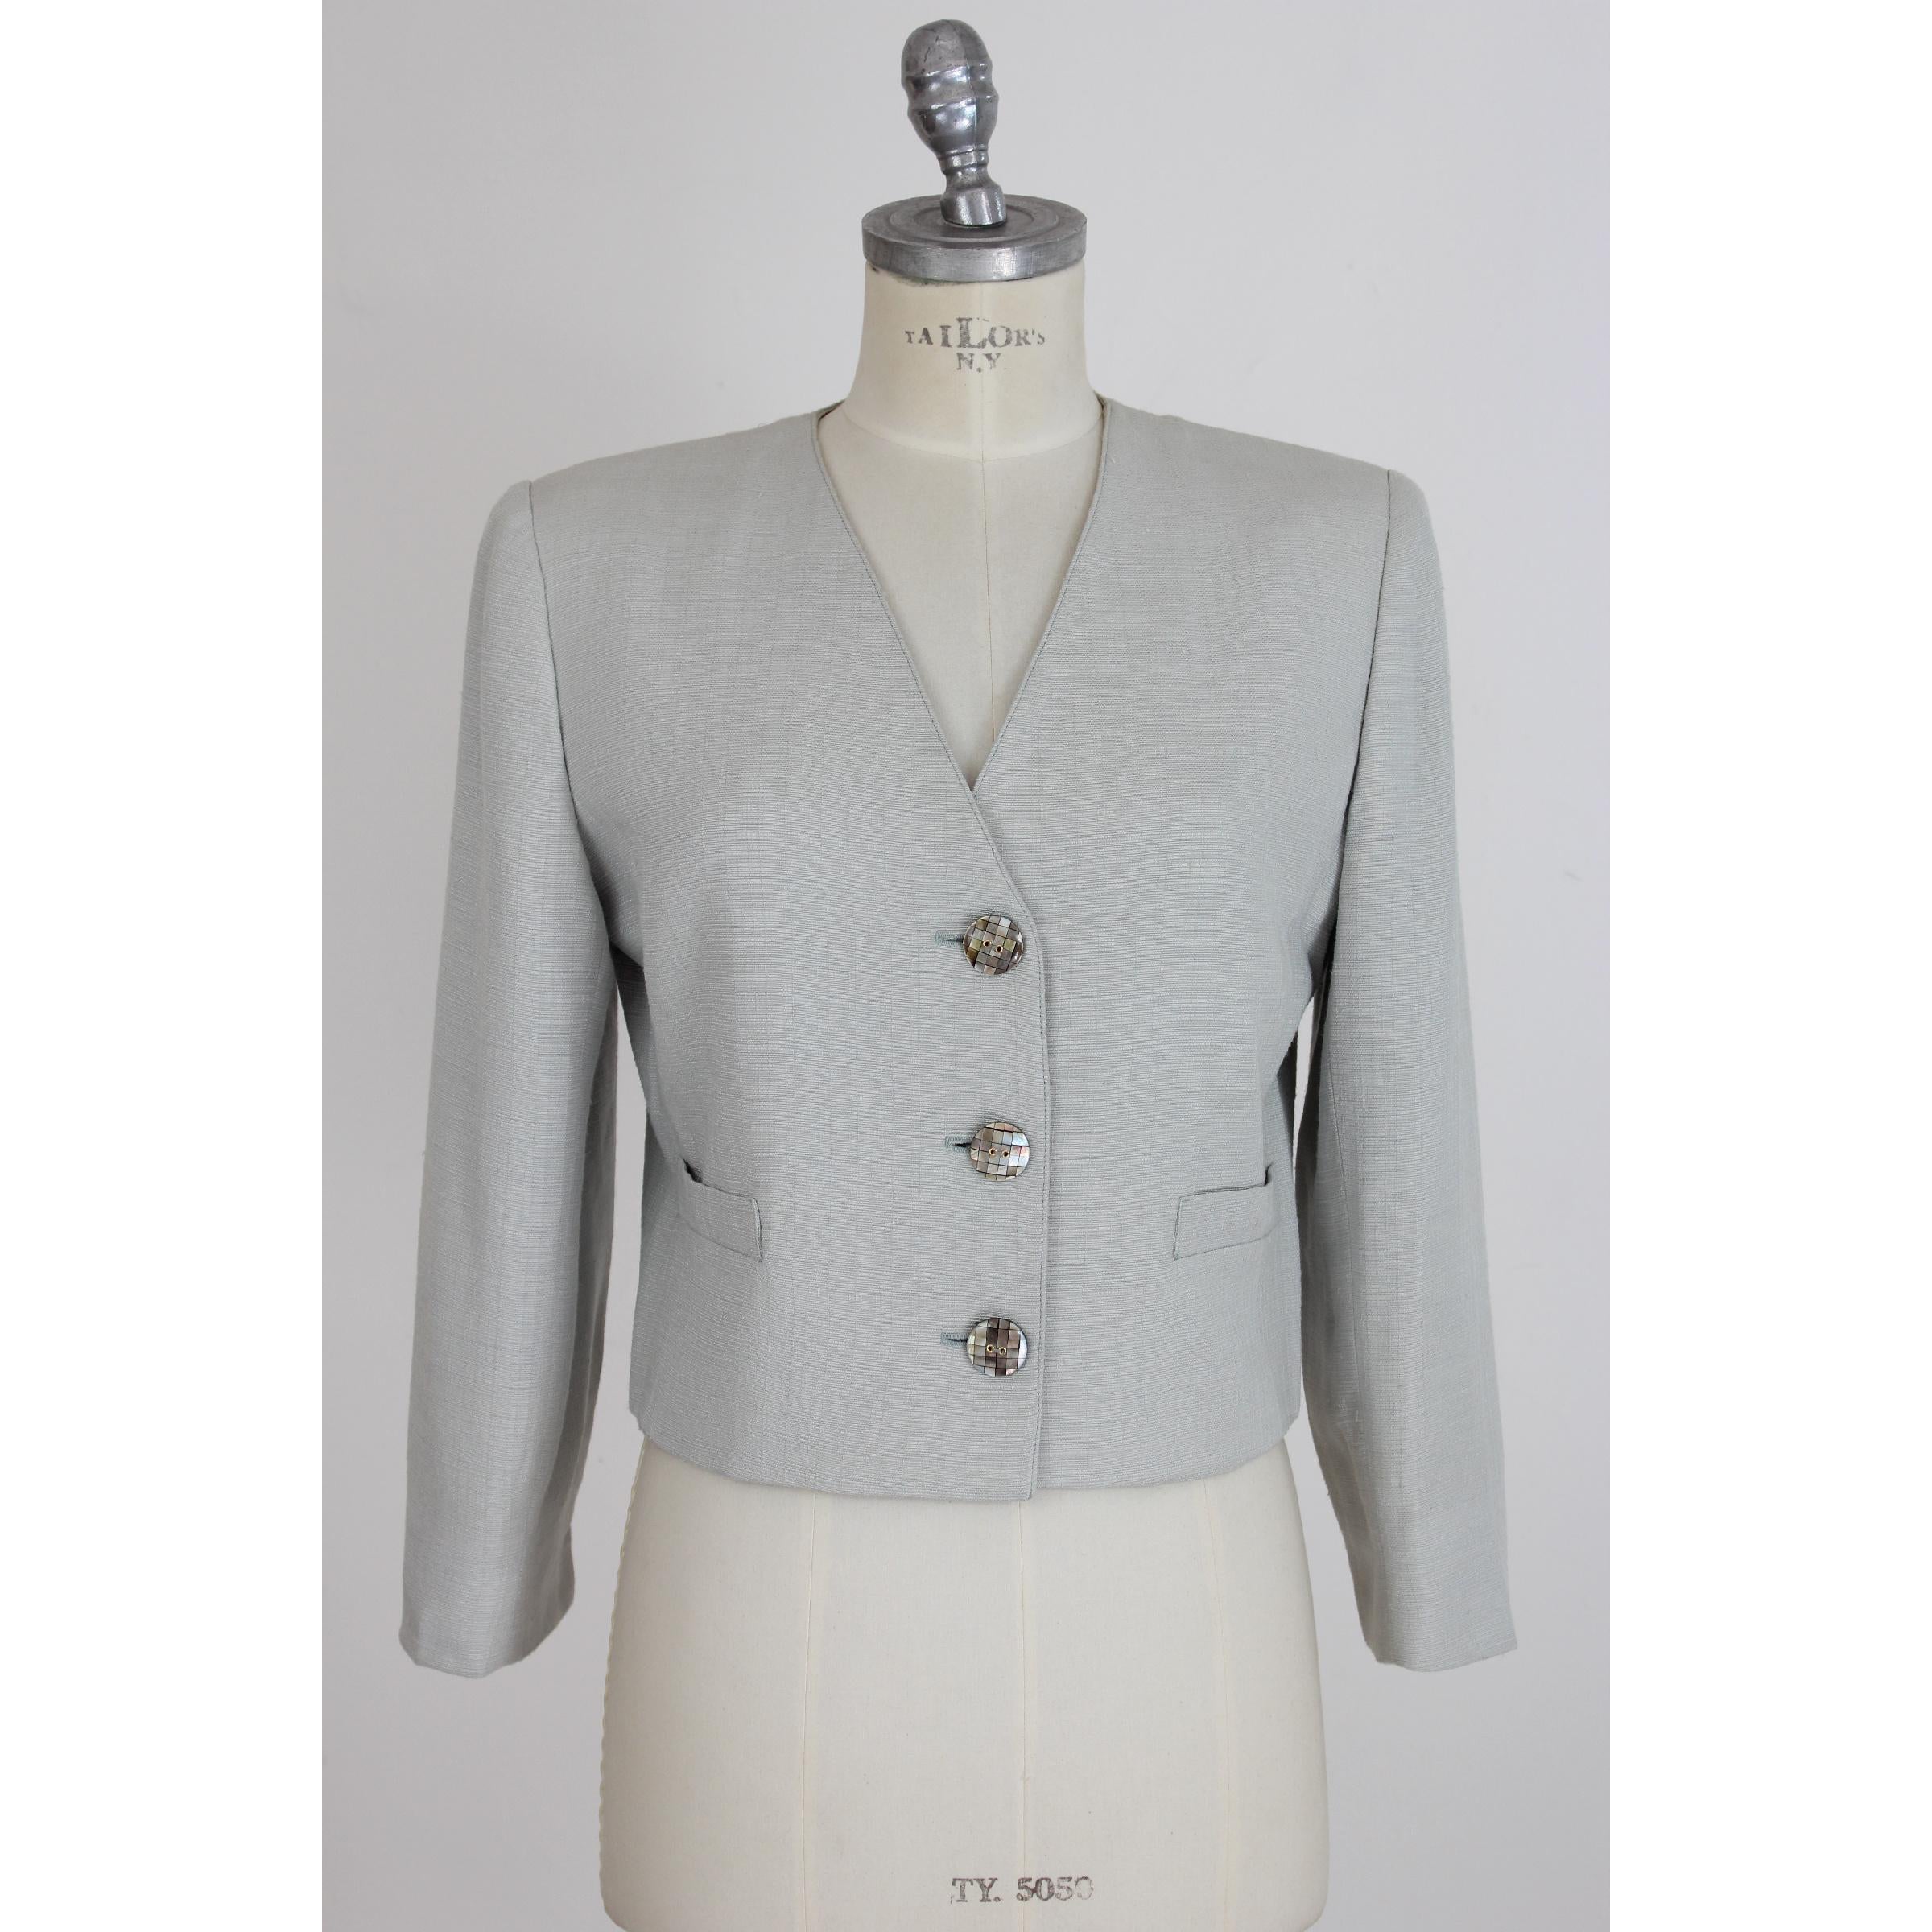 Vintage short jacket, model bolero for women, Valentino Miss V. Light gray color, 100% silk, lined interior, closure with mother-of-pearl mosaic buttons. Made in Italy. Excellent vintage conditions.
Size: 42 It 8 Us 10 Uk
Shoulder: 42 cm
Bust /